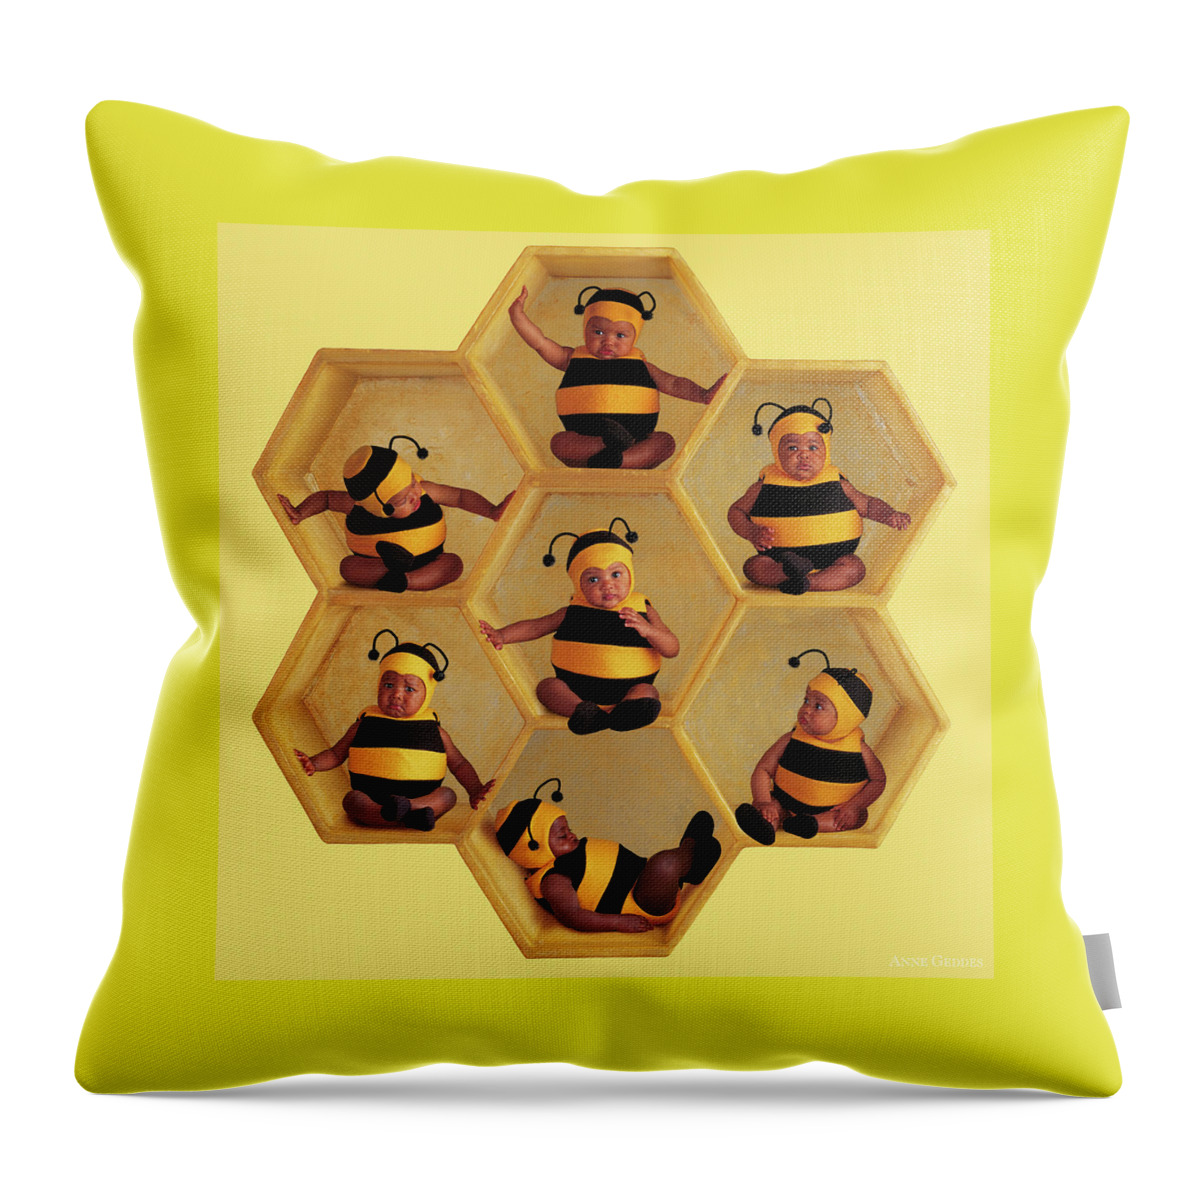 Bees Throw Pillow featuring the photograph The Beehive by Anne Geddes